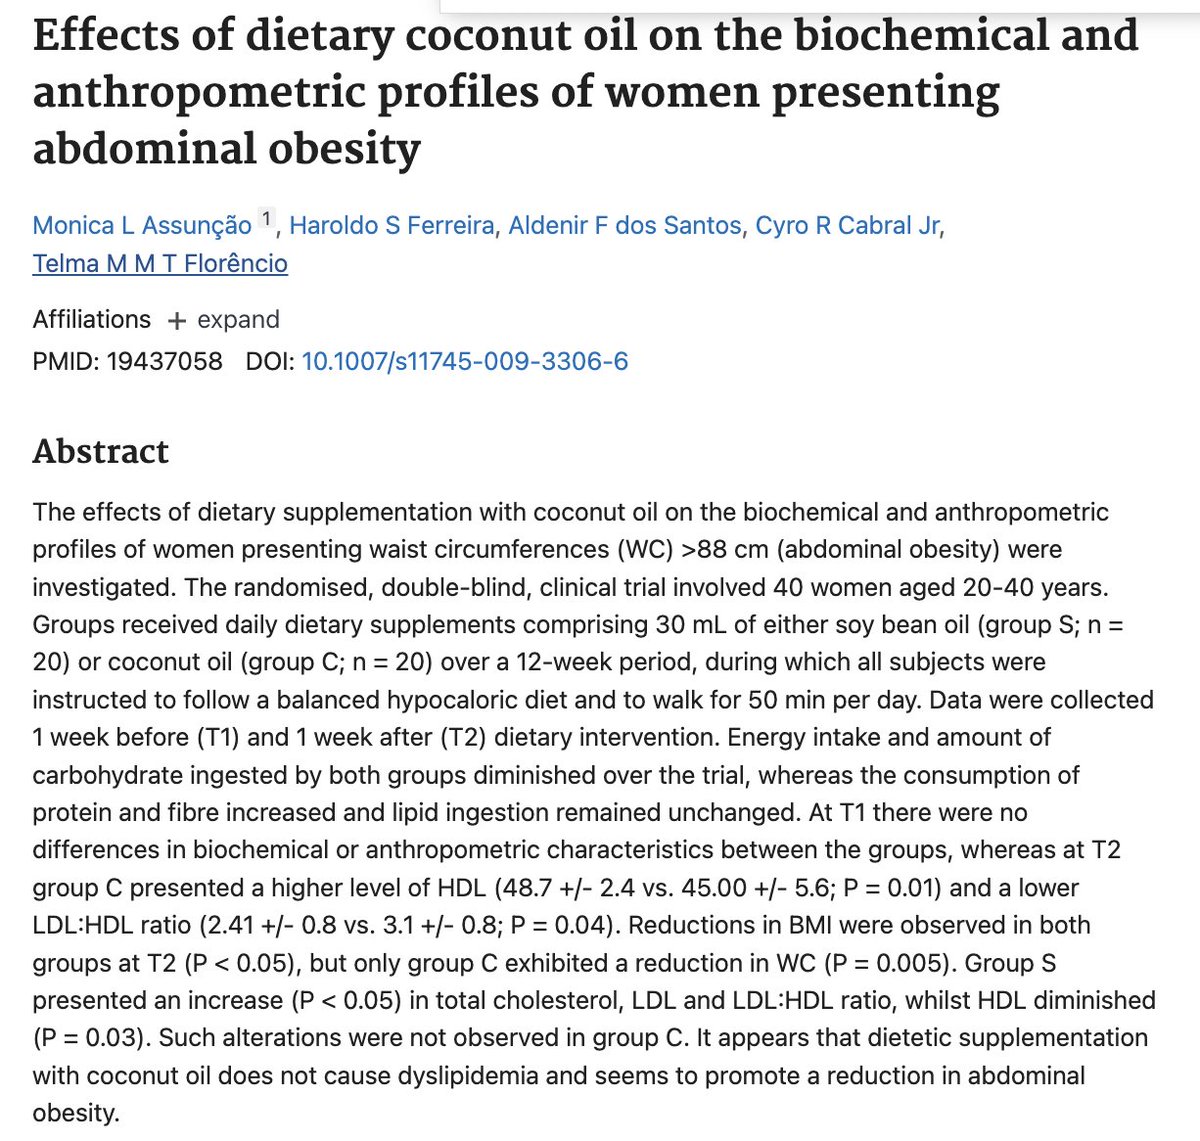 consuming coconut oil reduces abdominal obesity and waist circumference in both of these studies

incredible superfood